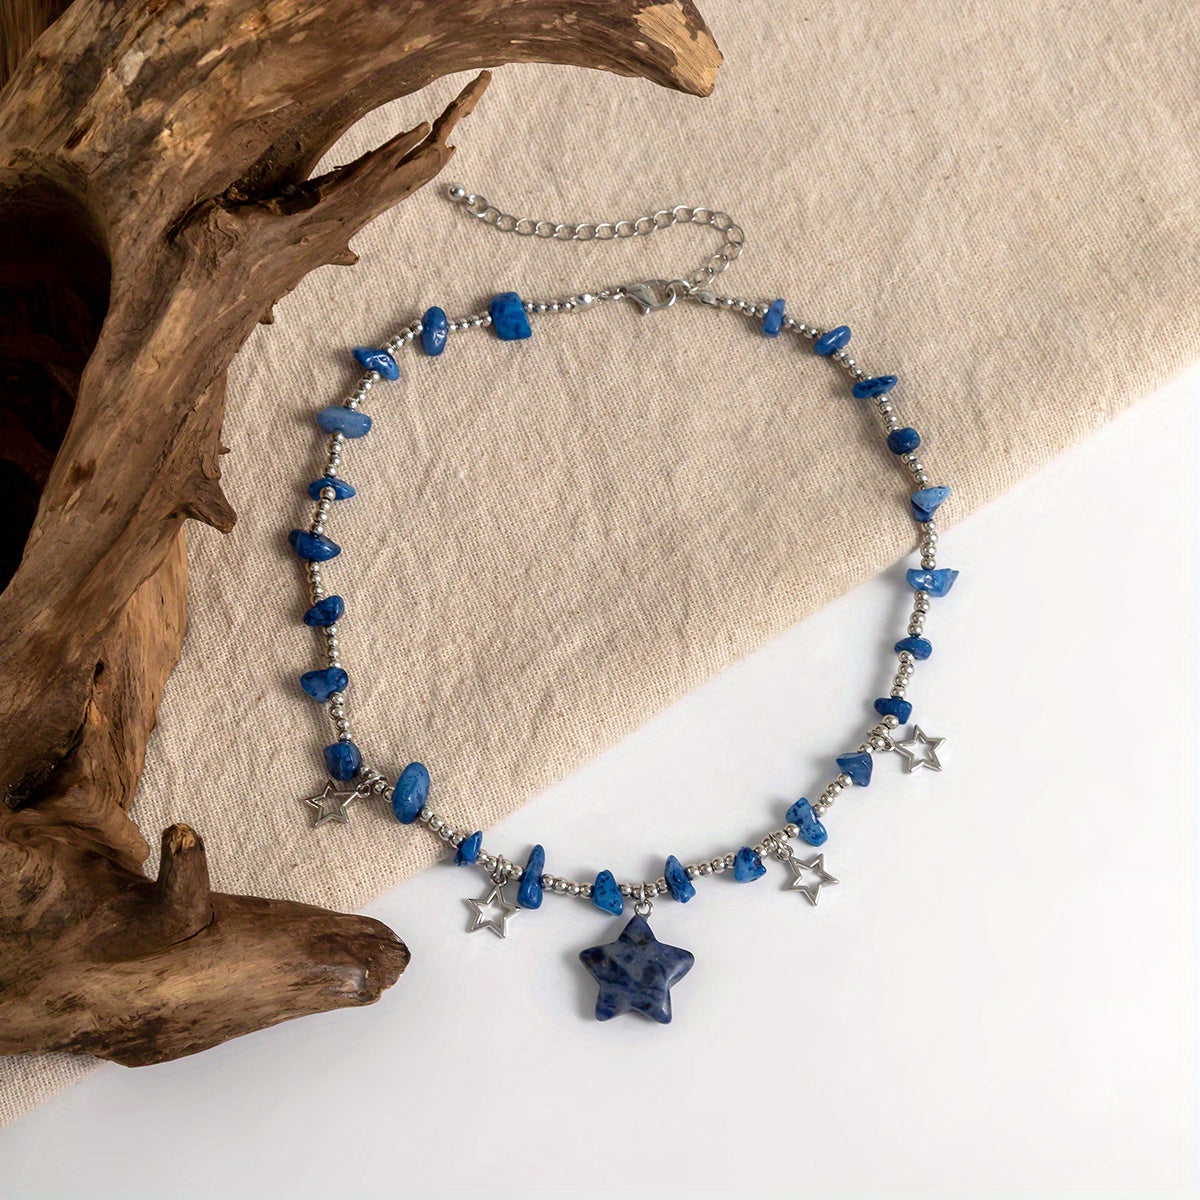 Colorful Irregular Stone Vintage Turquoise Beads Star Pendant Clavicle Necklace For Girls Gift